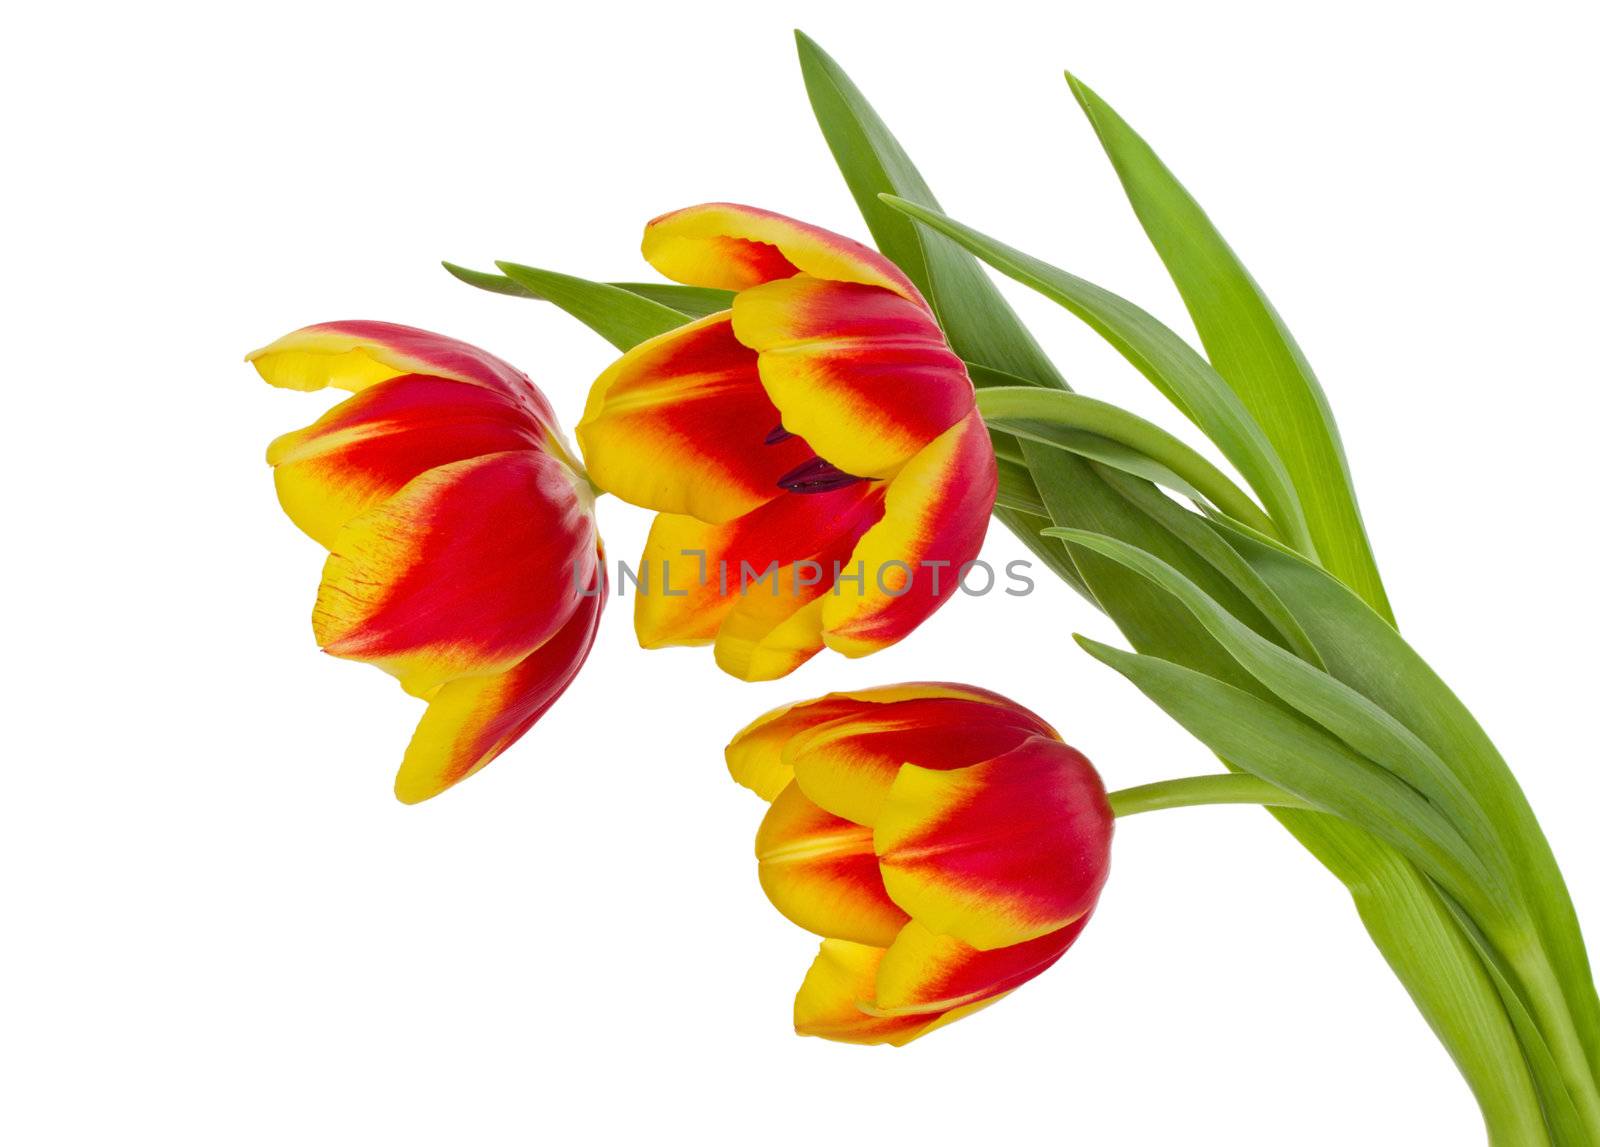 red-yellow tulips bouquet by Alekcey